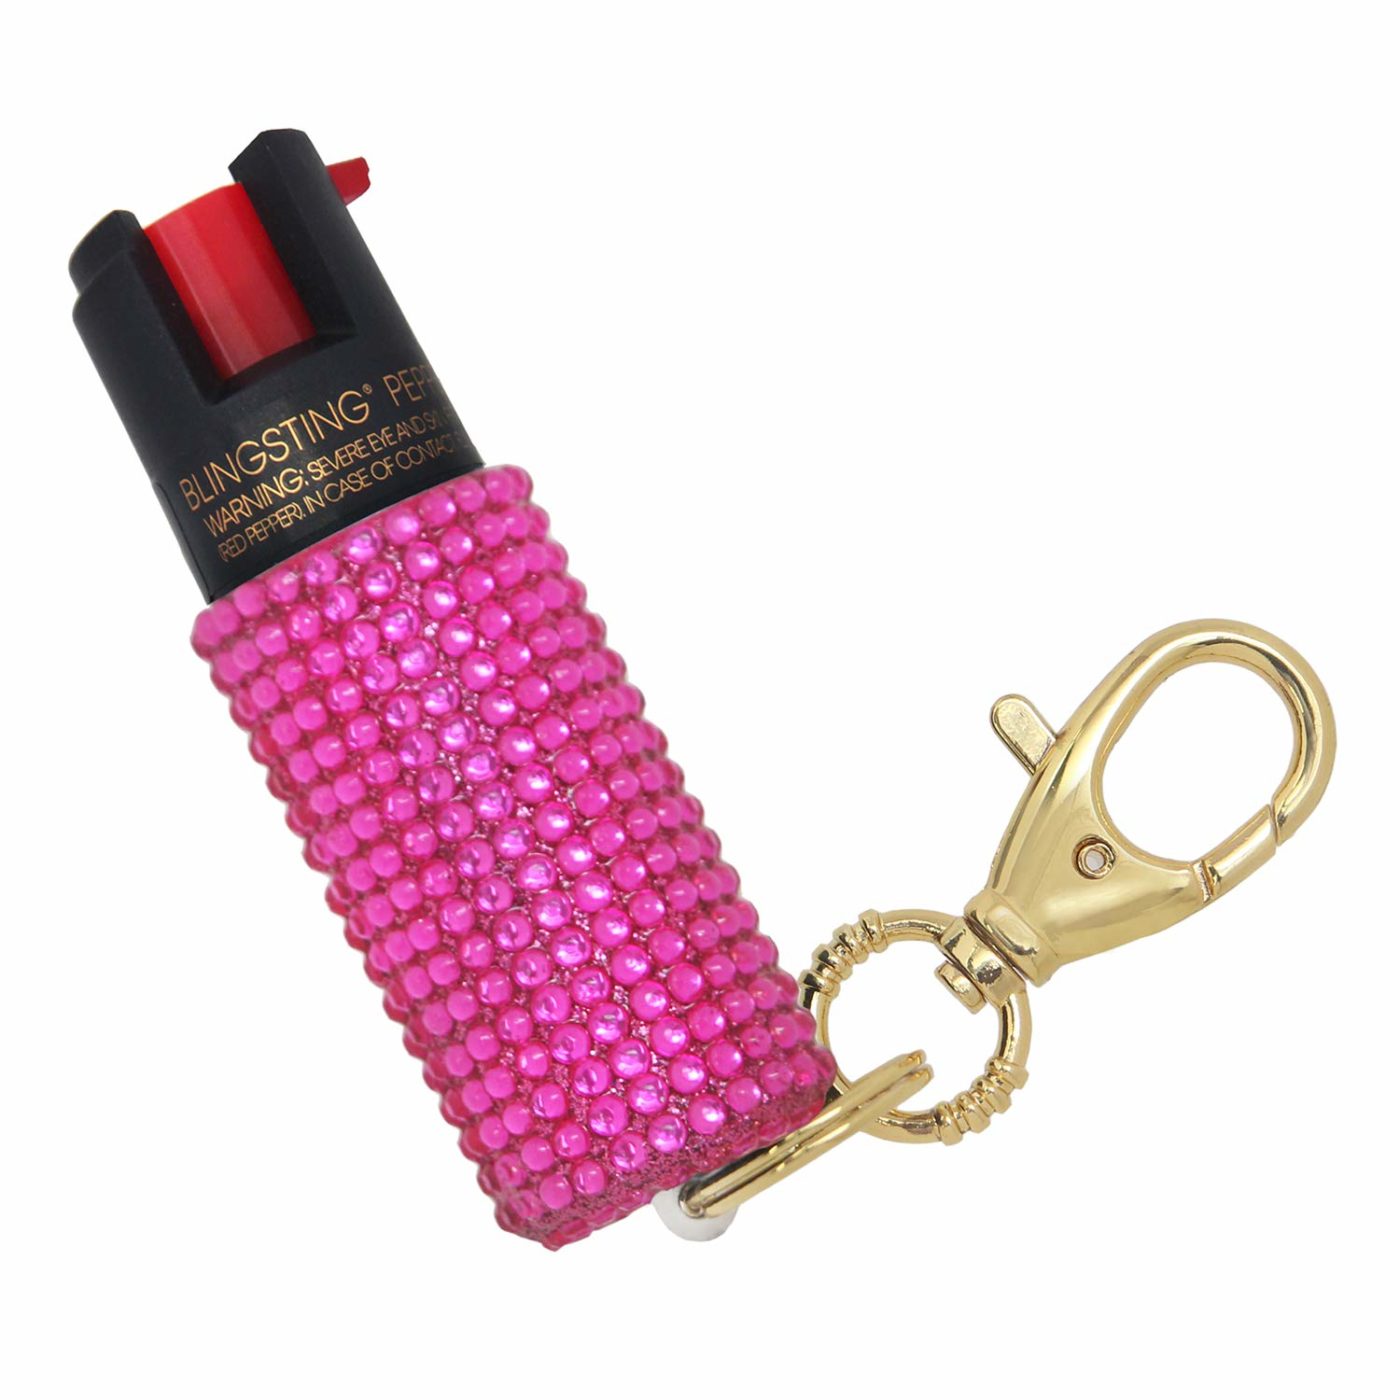 10 Best Self-Defense Keychain Reviews: A Useful Travel Safety Gadget